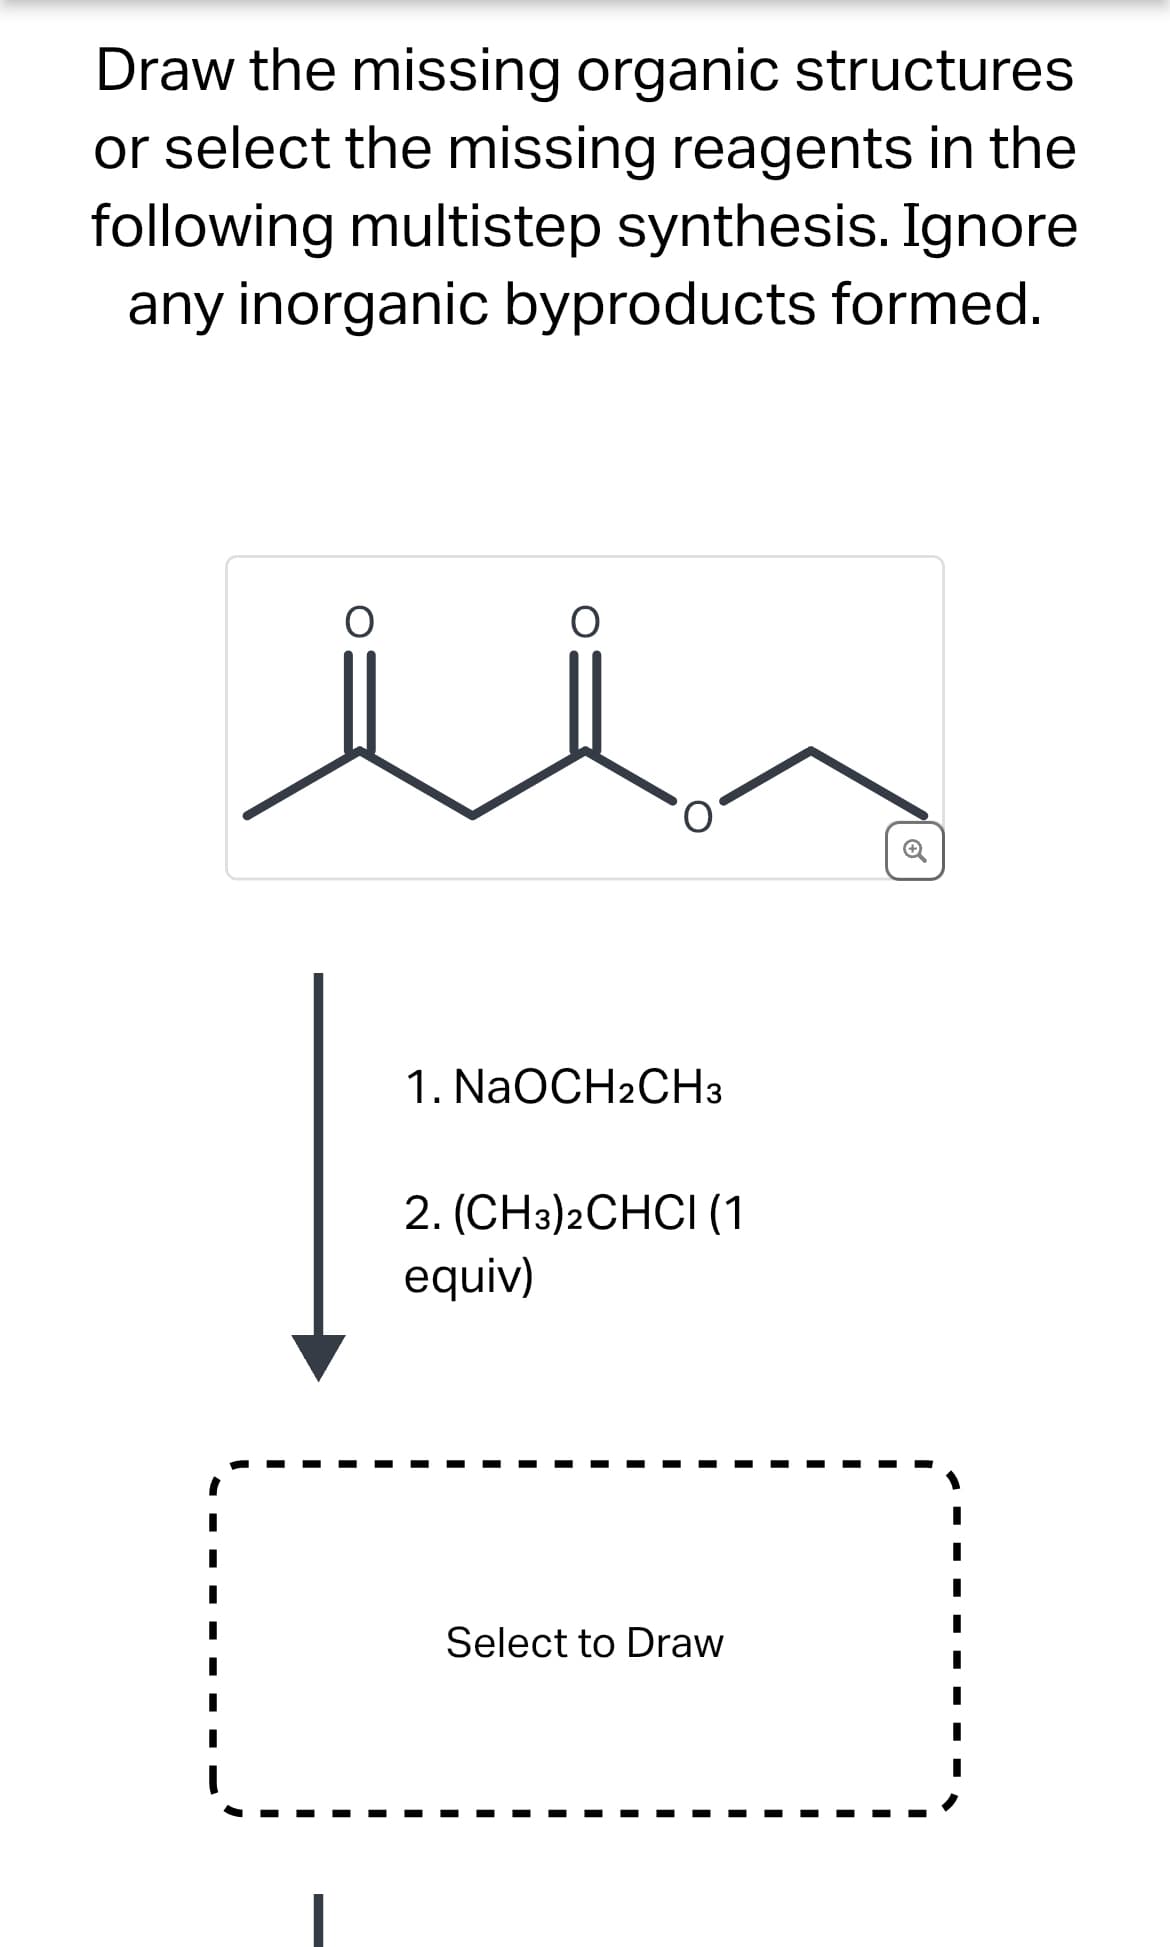 Draw the missing organic structures
or select the missing reagents in the
following multistep synthesis. Ignore
any inorganic byproducts formed.
1. NaOCH2CH3
2. (CH3)2CHCI (1
equiv)
Select to Draw
Q